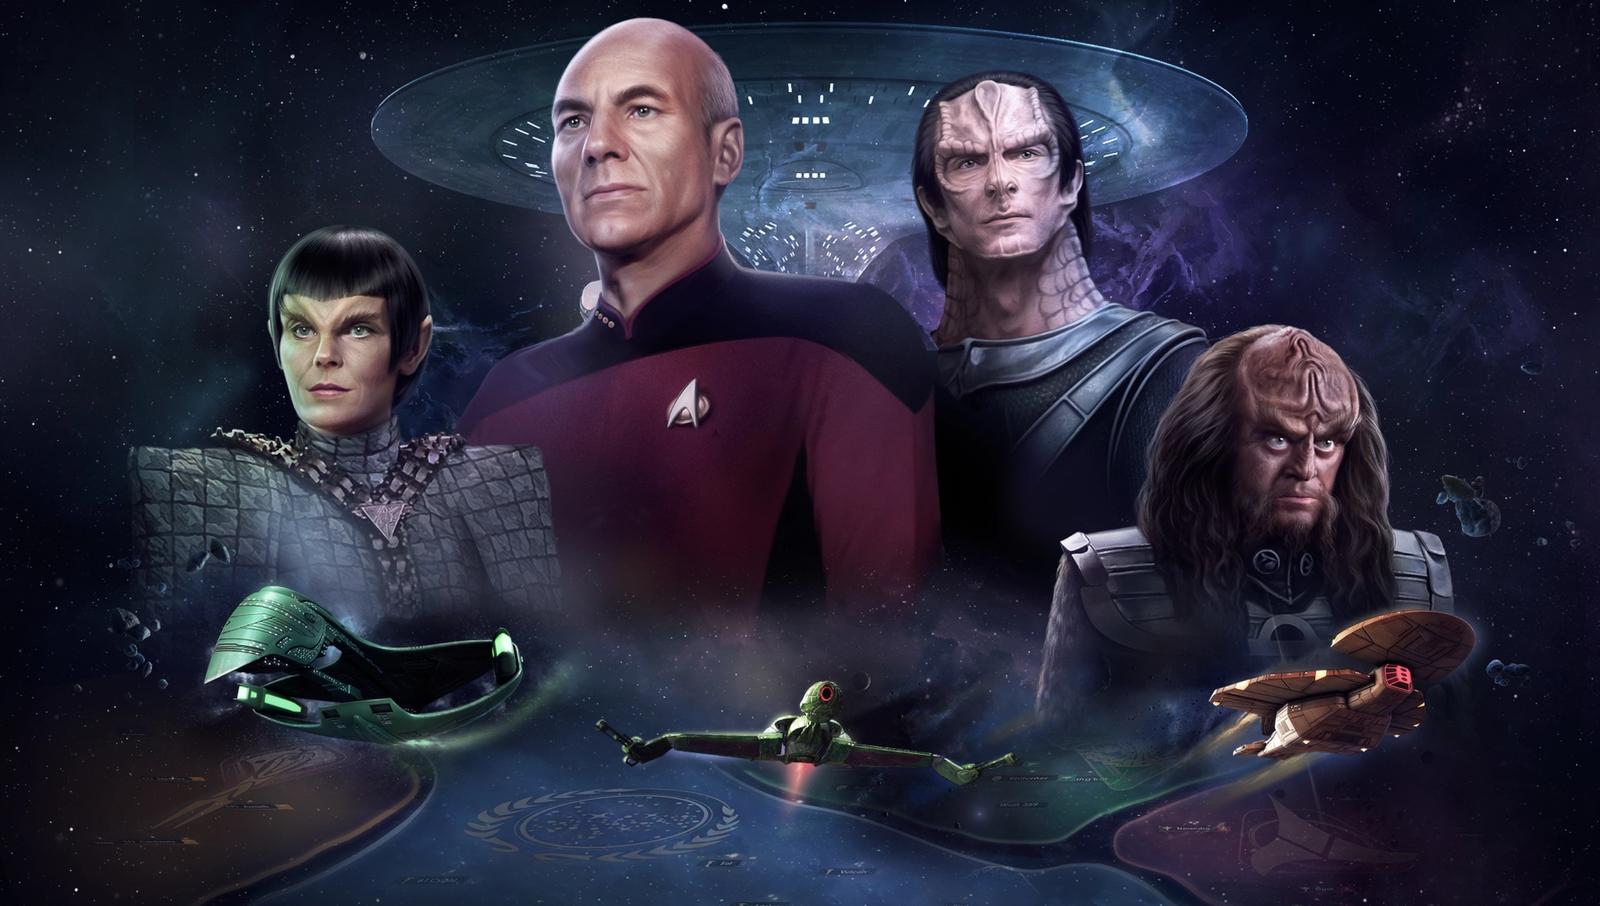 Key art for Star Trek Infinite featuring several characters from the show